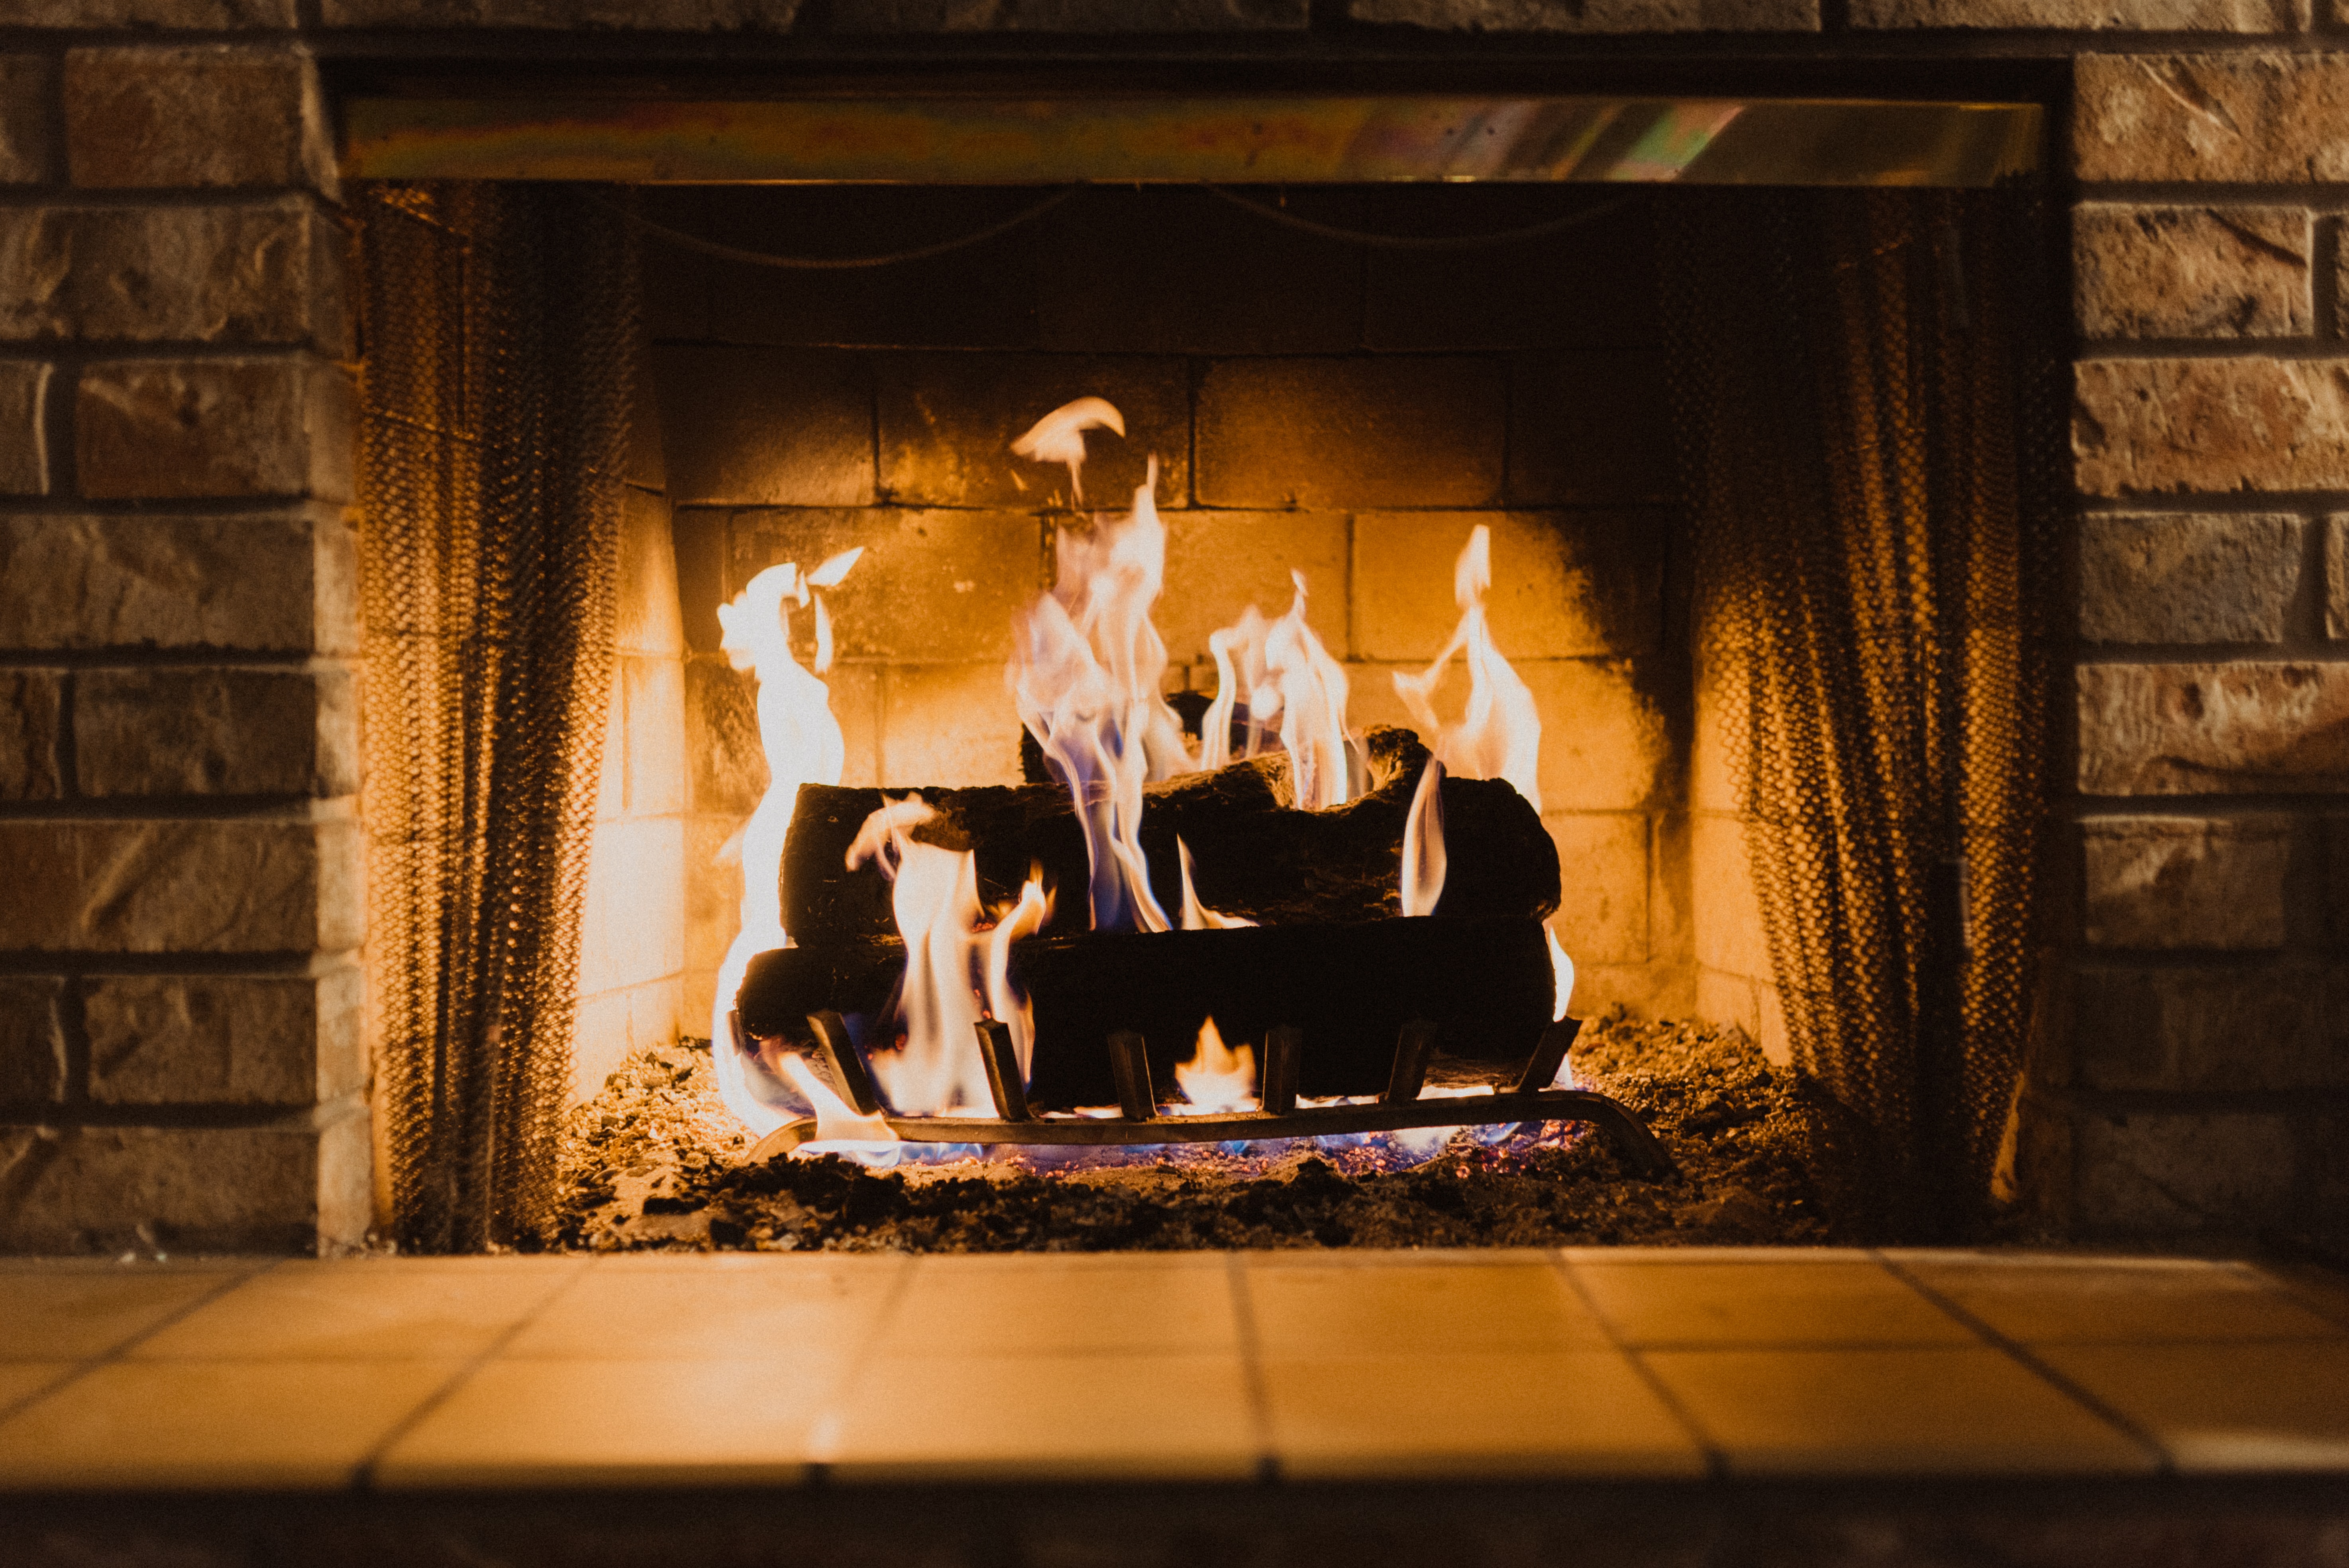 Roaring fire in a brick fireplace with tile hearth 